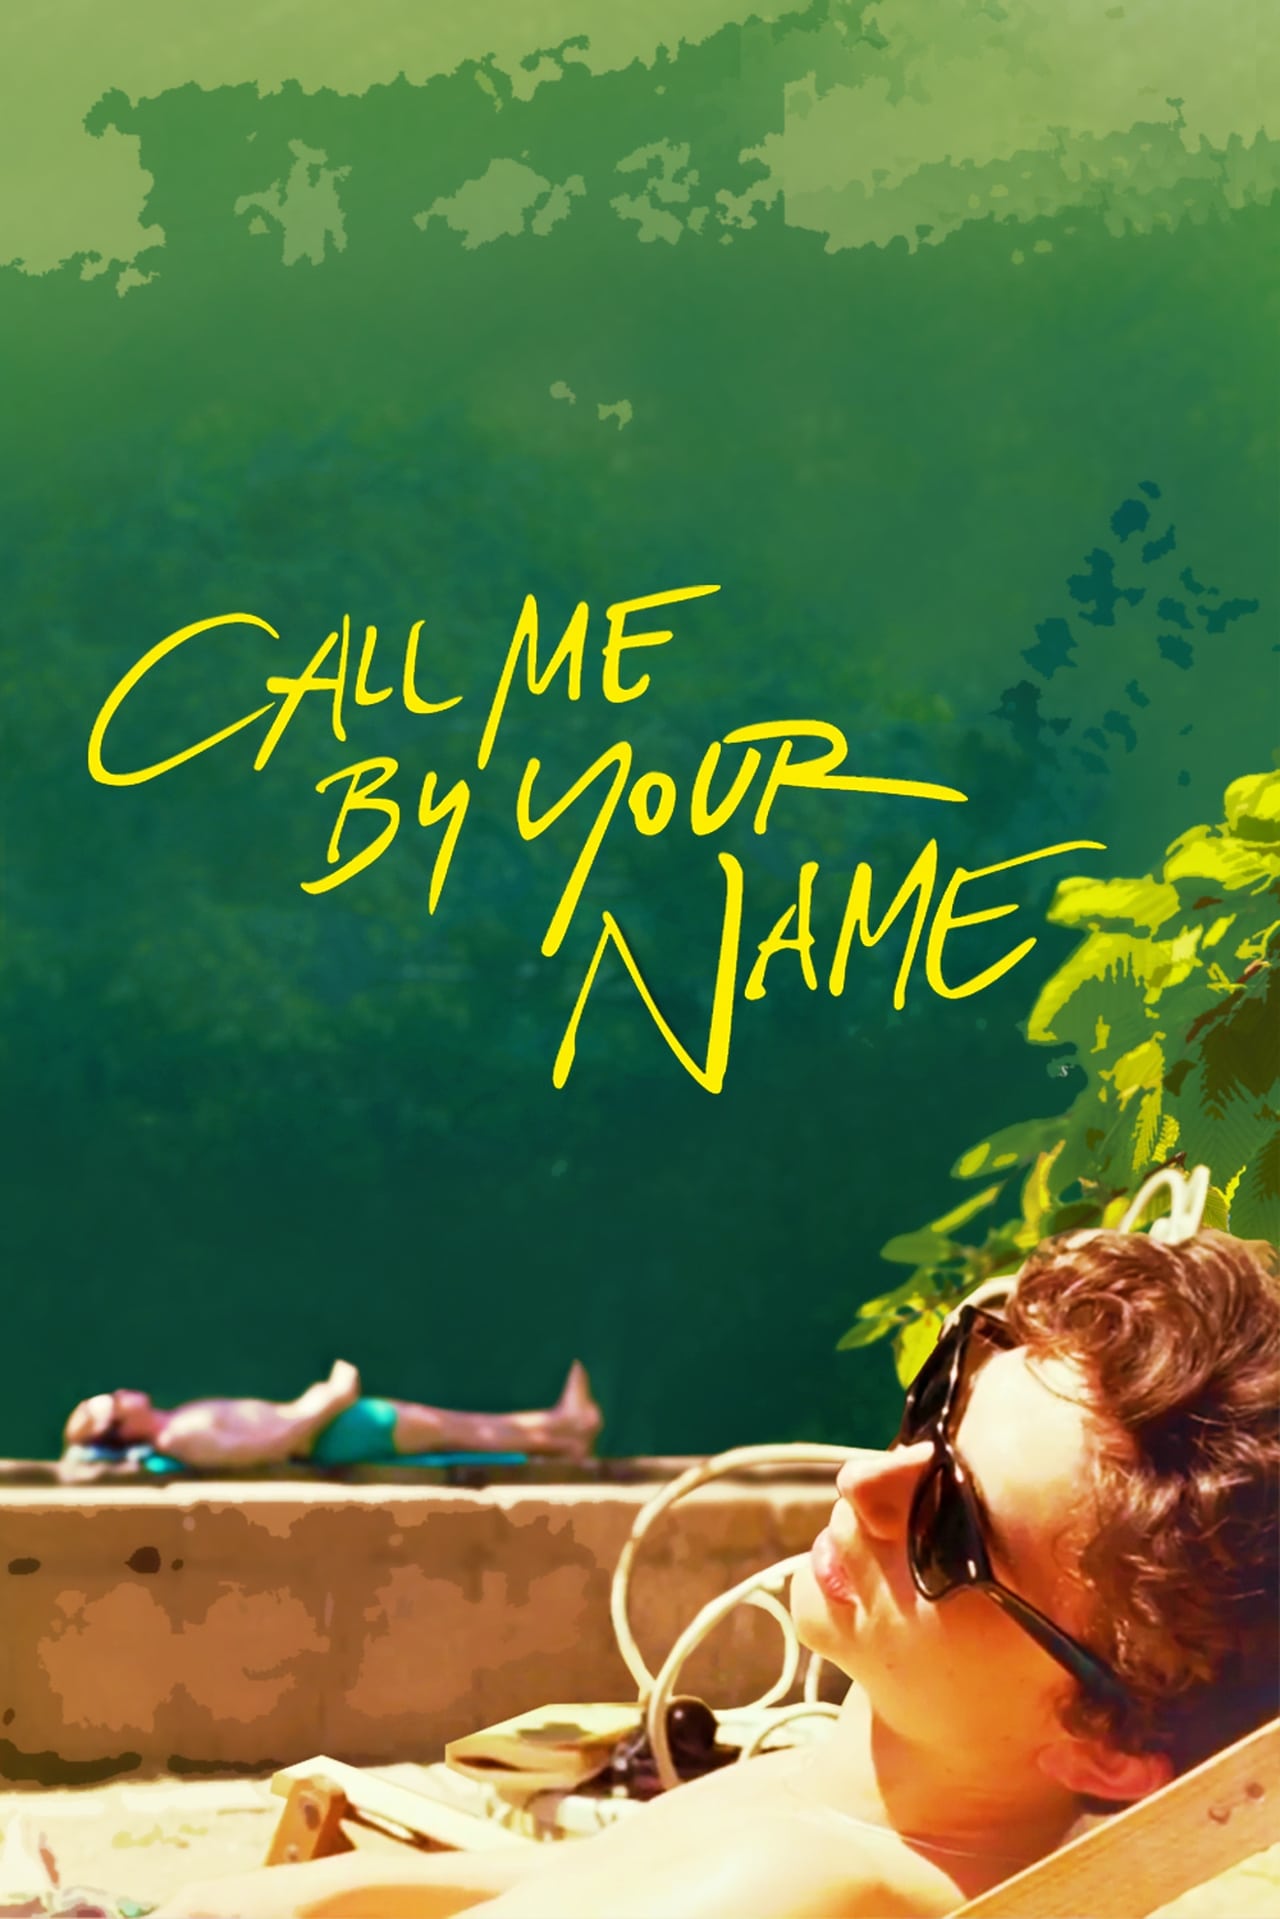 Free Watch Call Me by Your Name (2017) Online Movies at